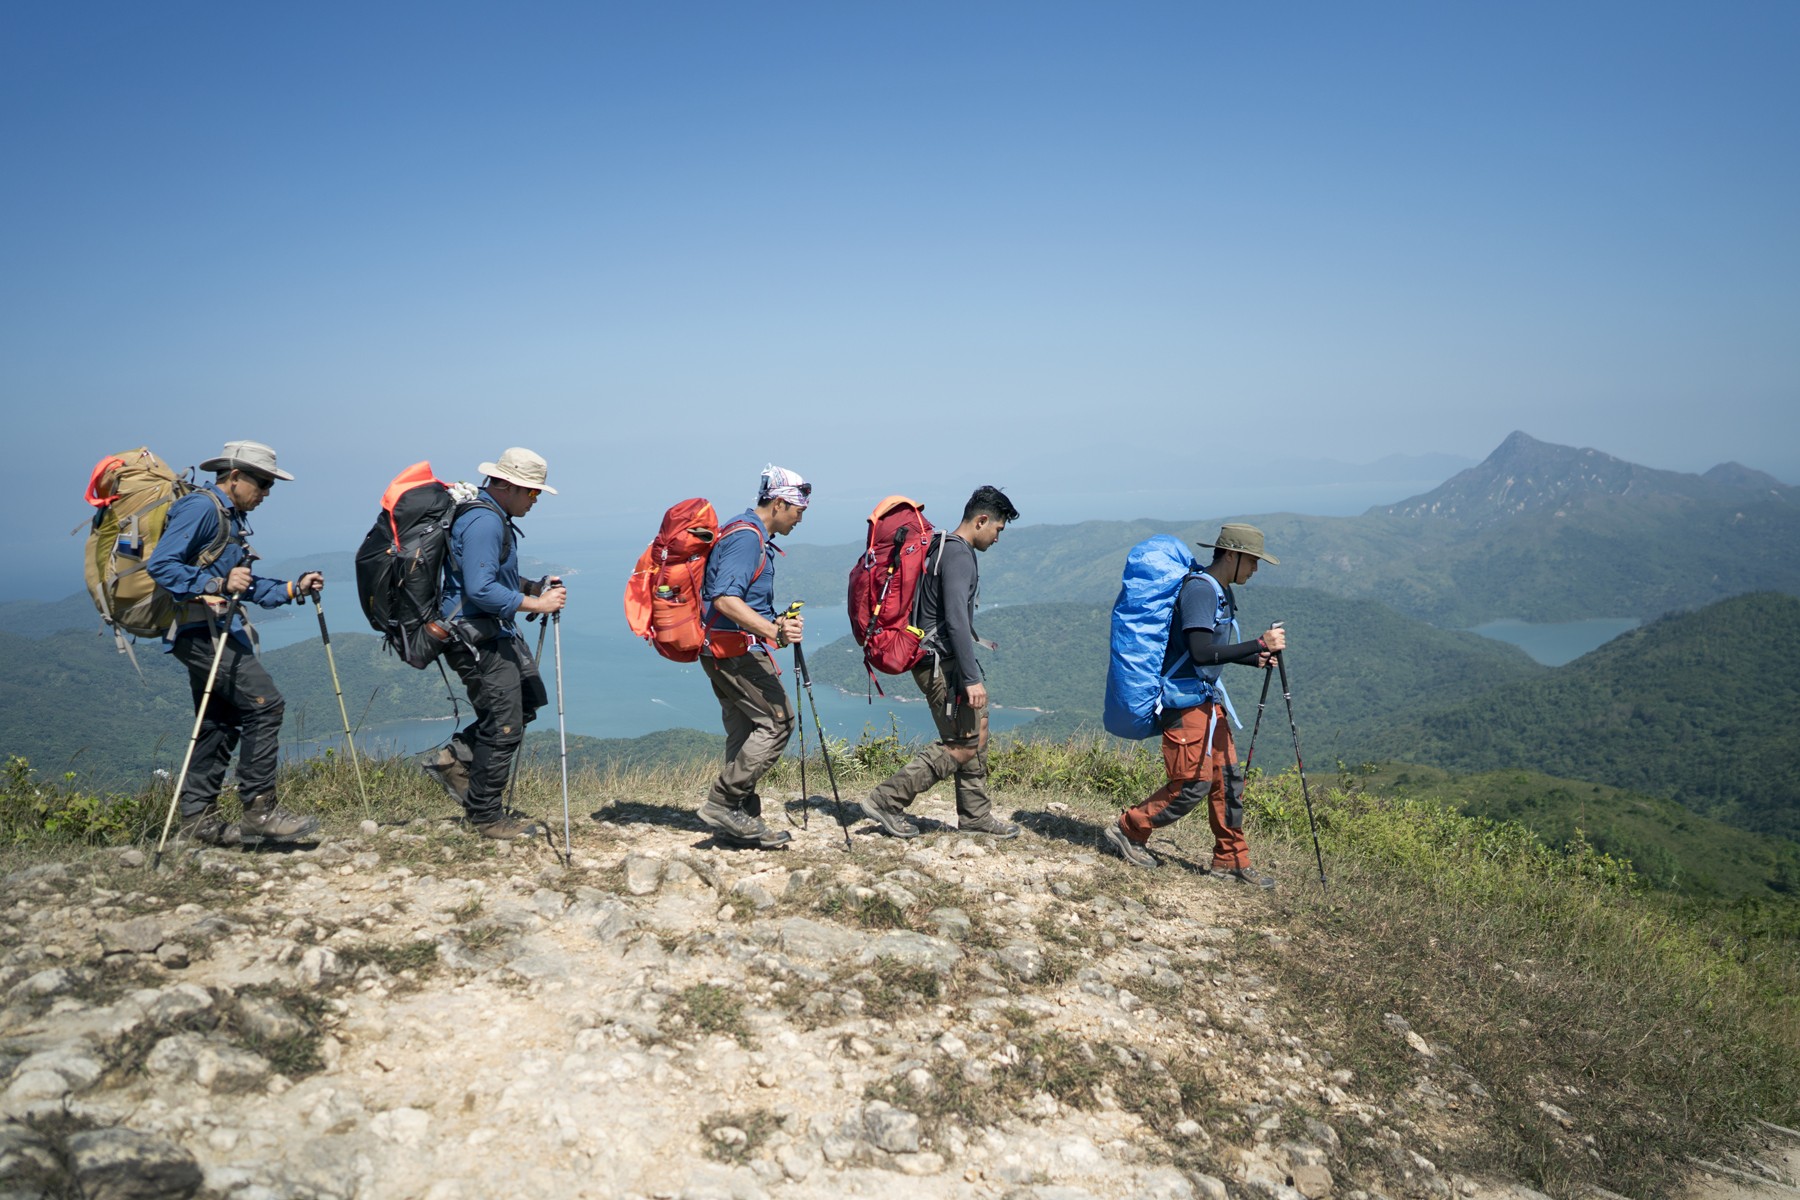 The Classic Hong Kong takes hikers from around the world on a three-day hiking and camping trip through the New Territories. Photos: Lloyd Belcher Visuals